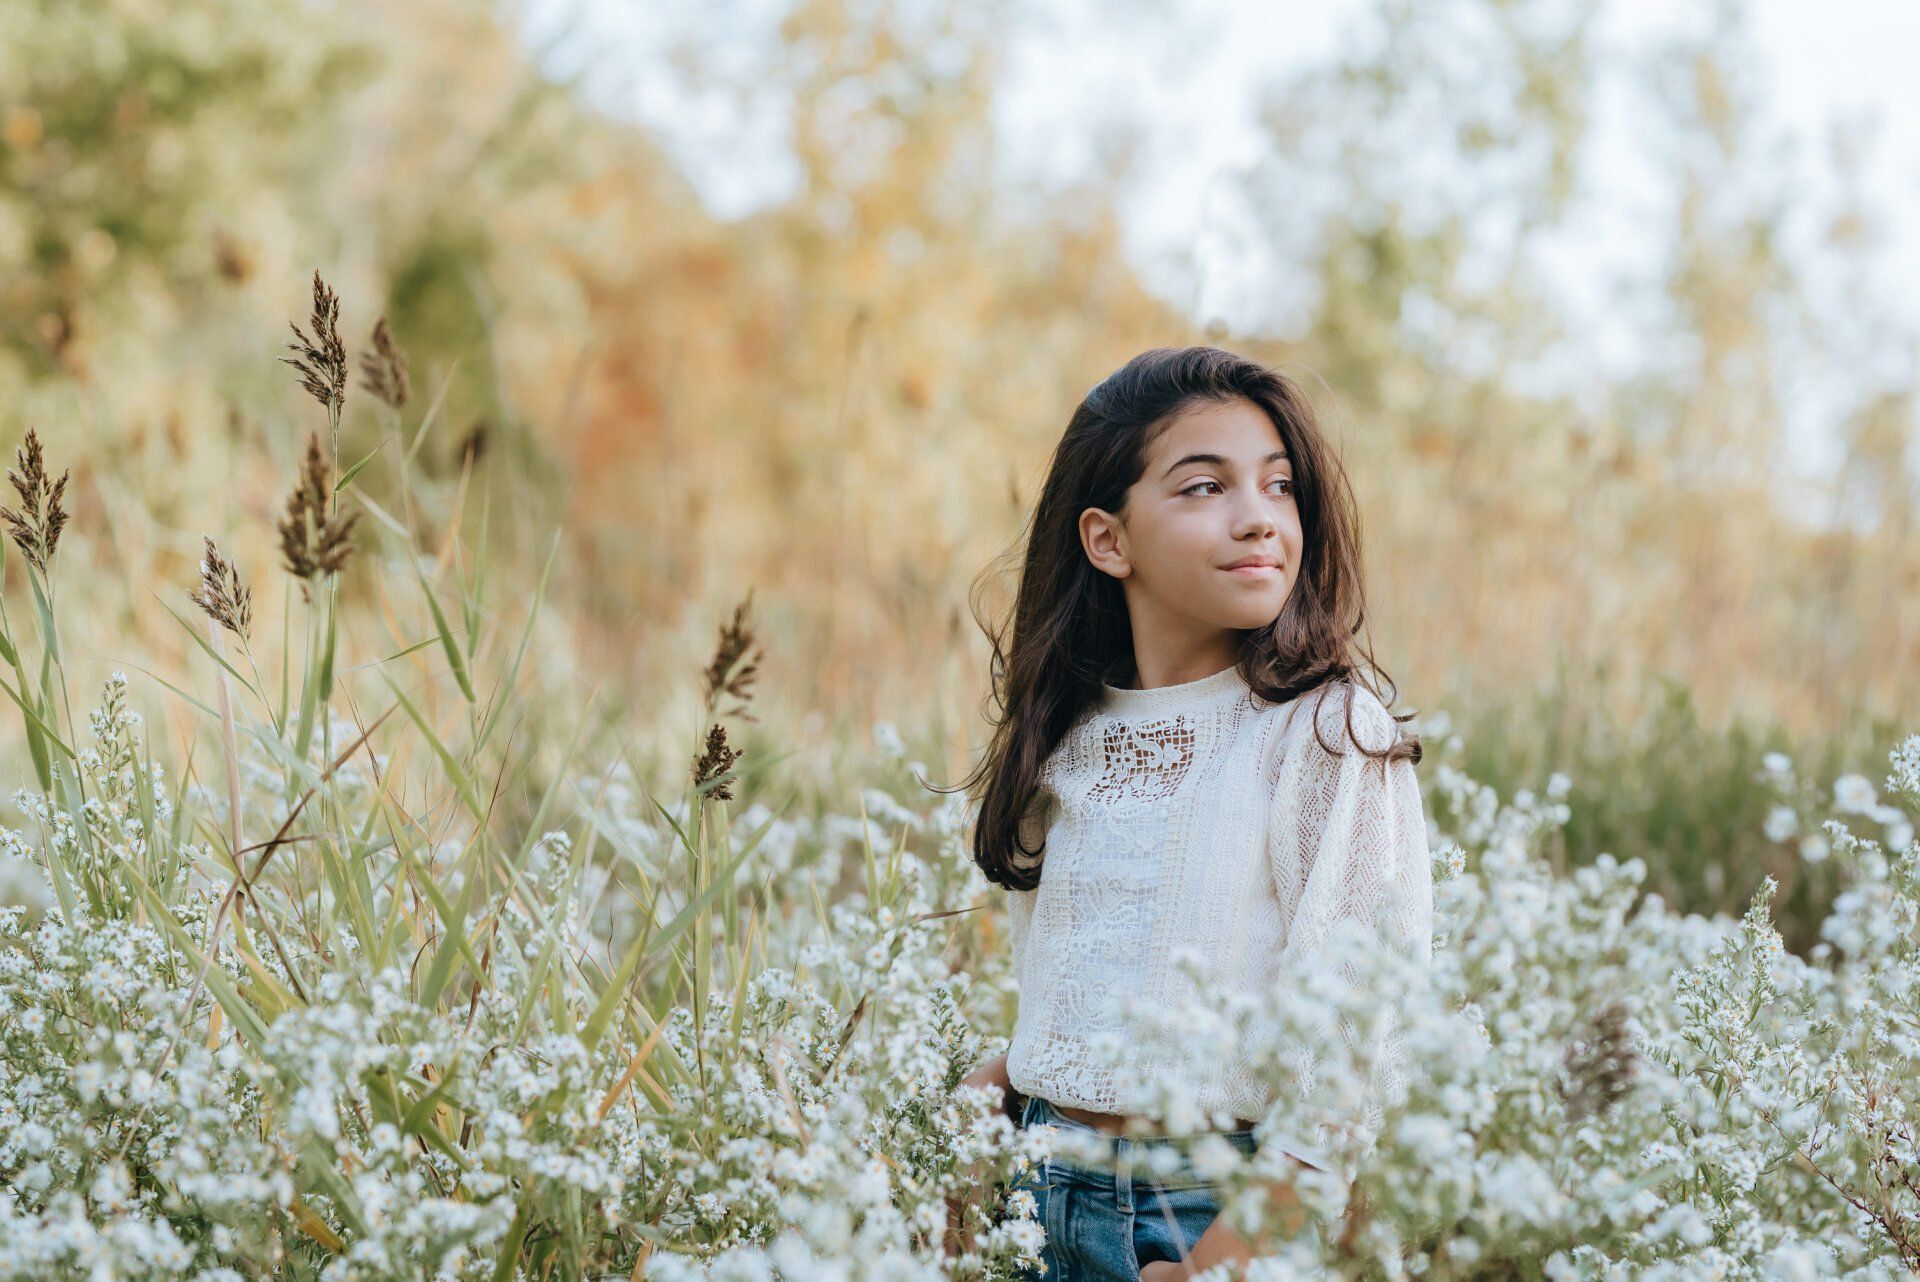 Young girl standing in field of white wild flowers for fall photoshoot